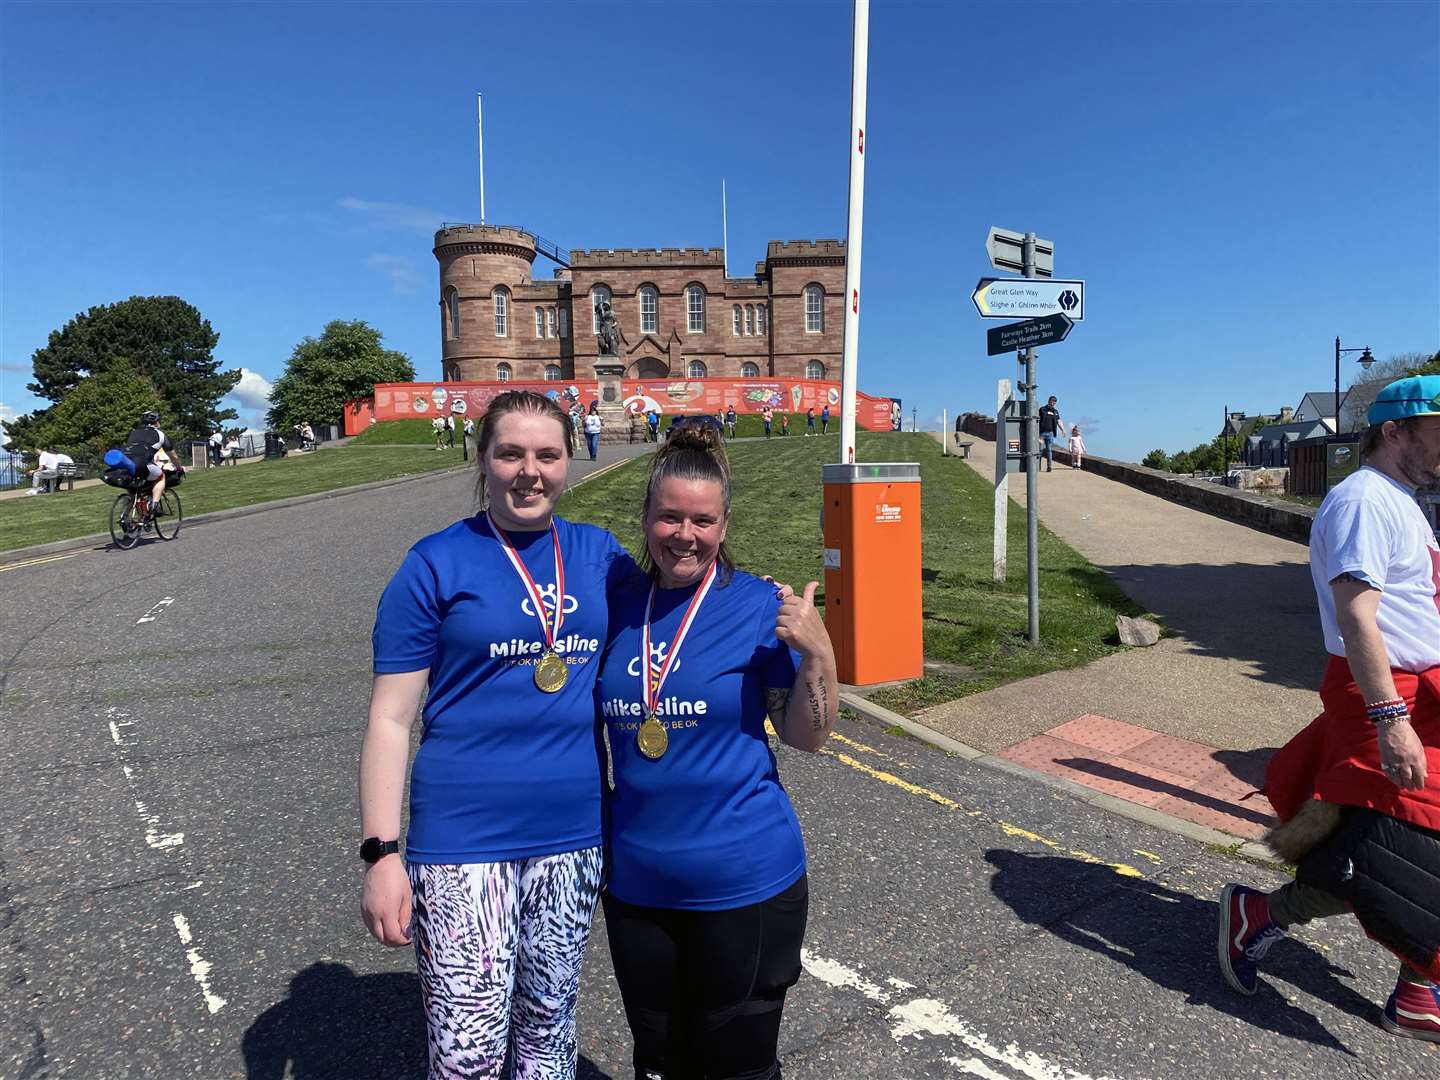 Kailey MacWilliam and Andrea Stewart at the end of the fundraising run at Inverness Castle.